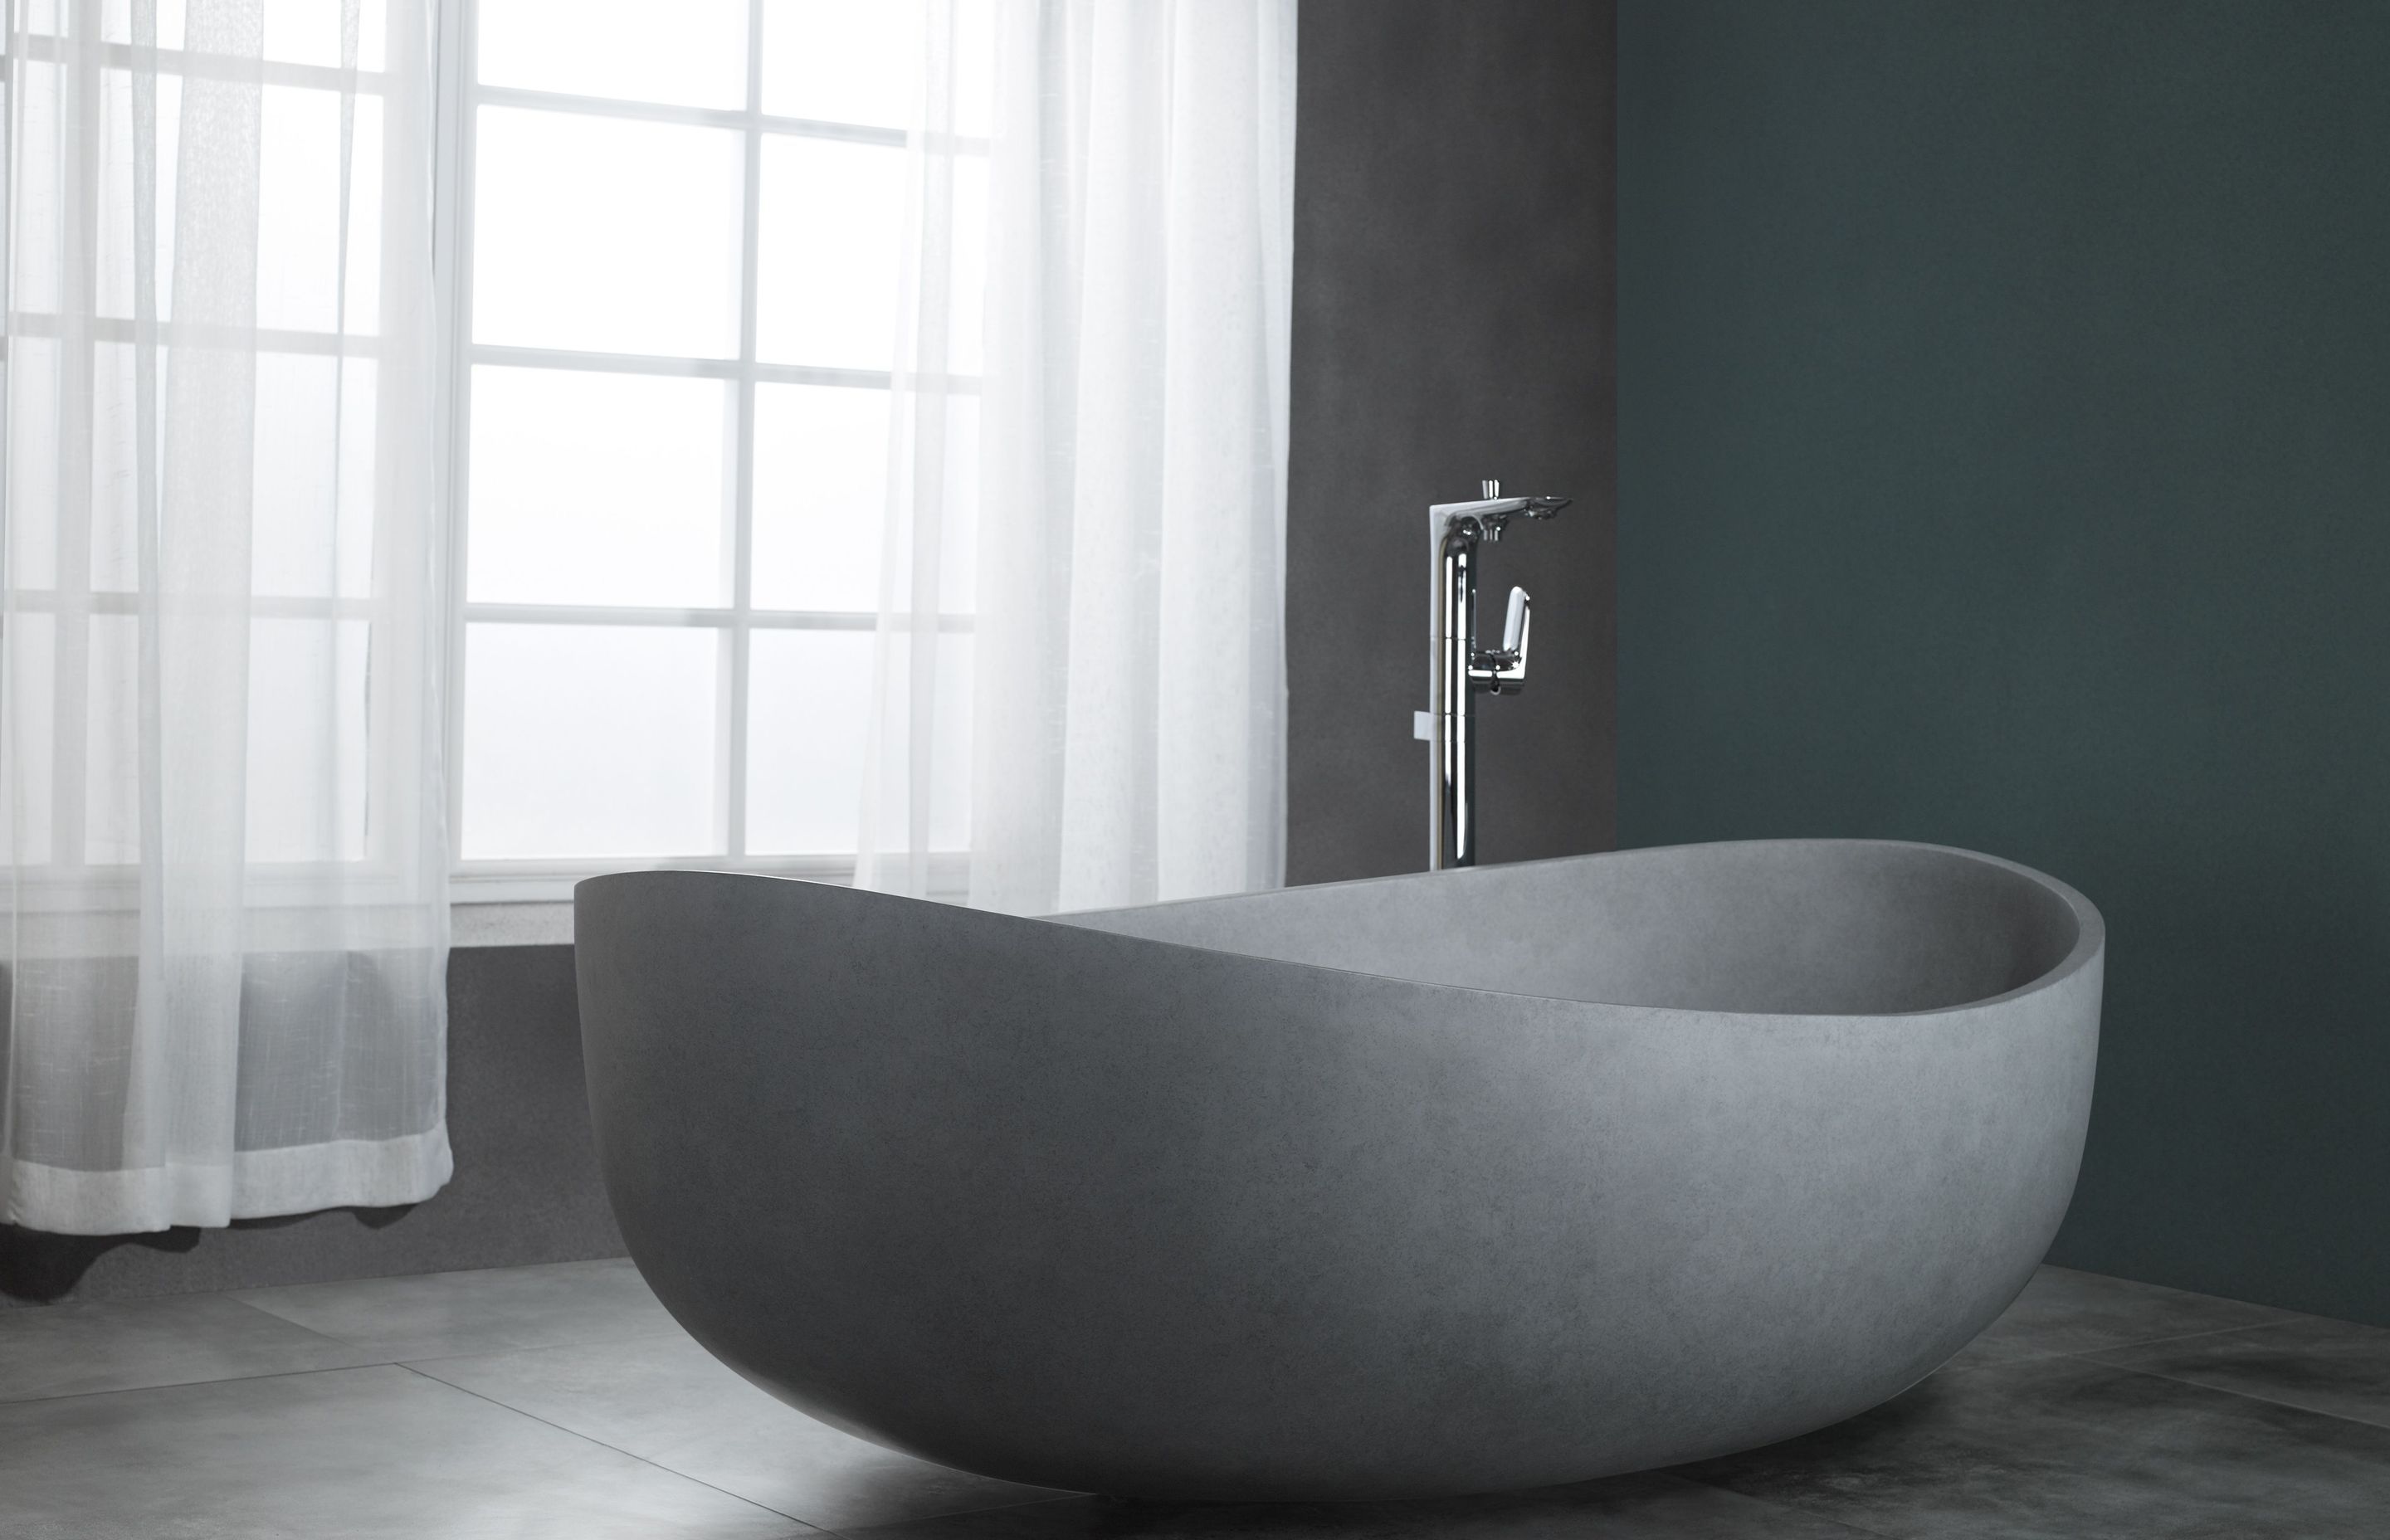 Showpiece baths have been getting more popular in the last decade.